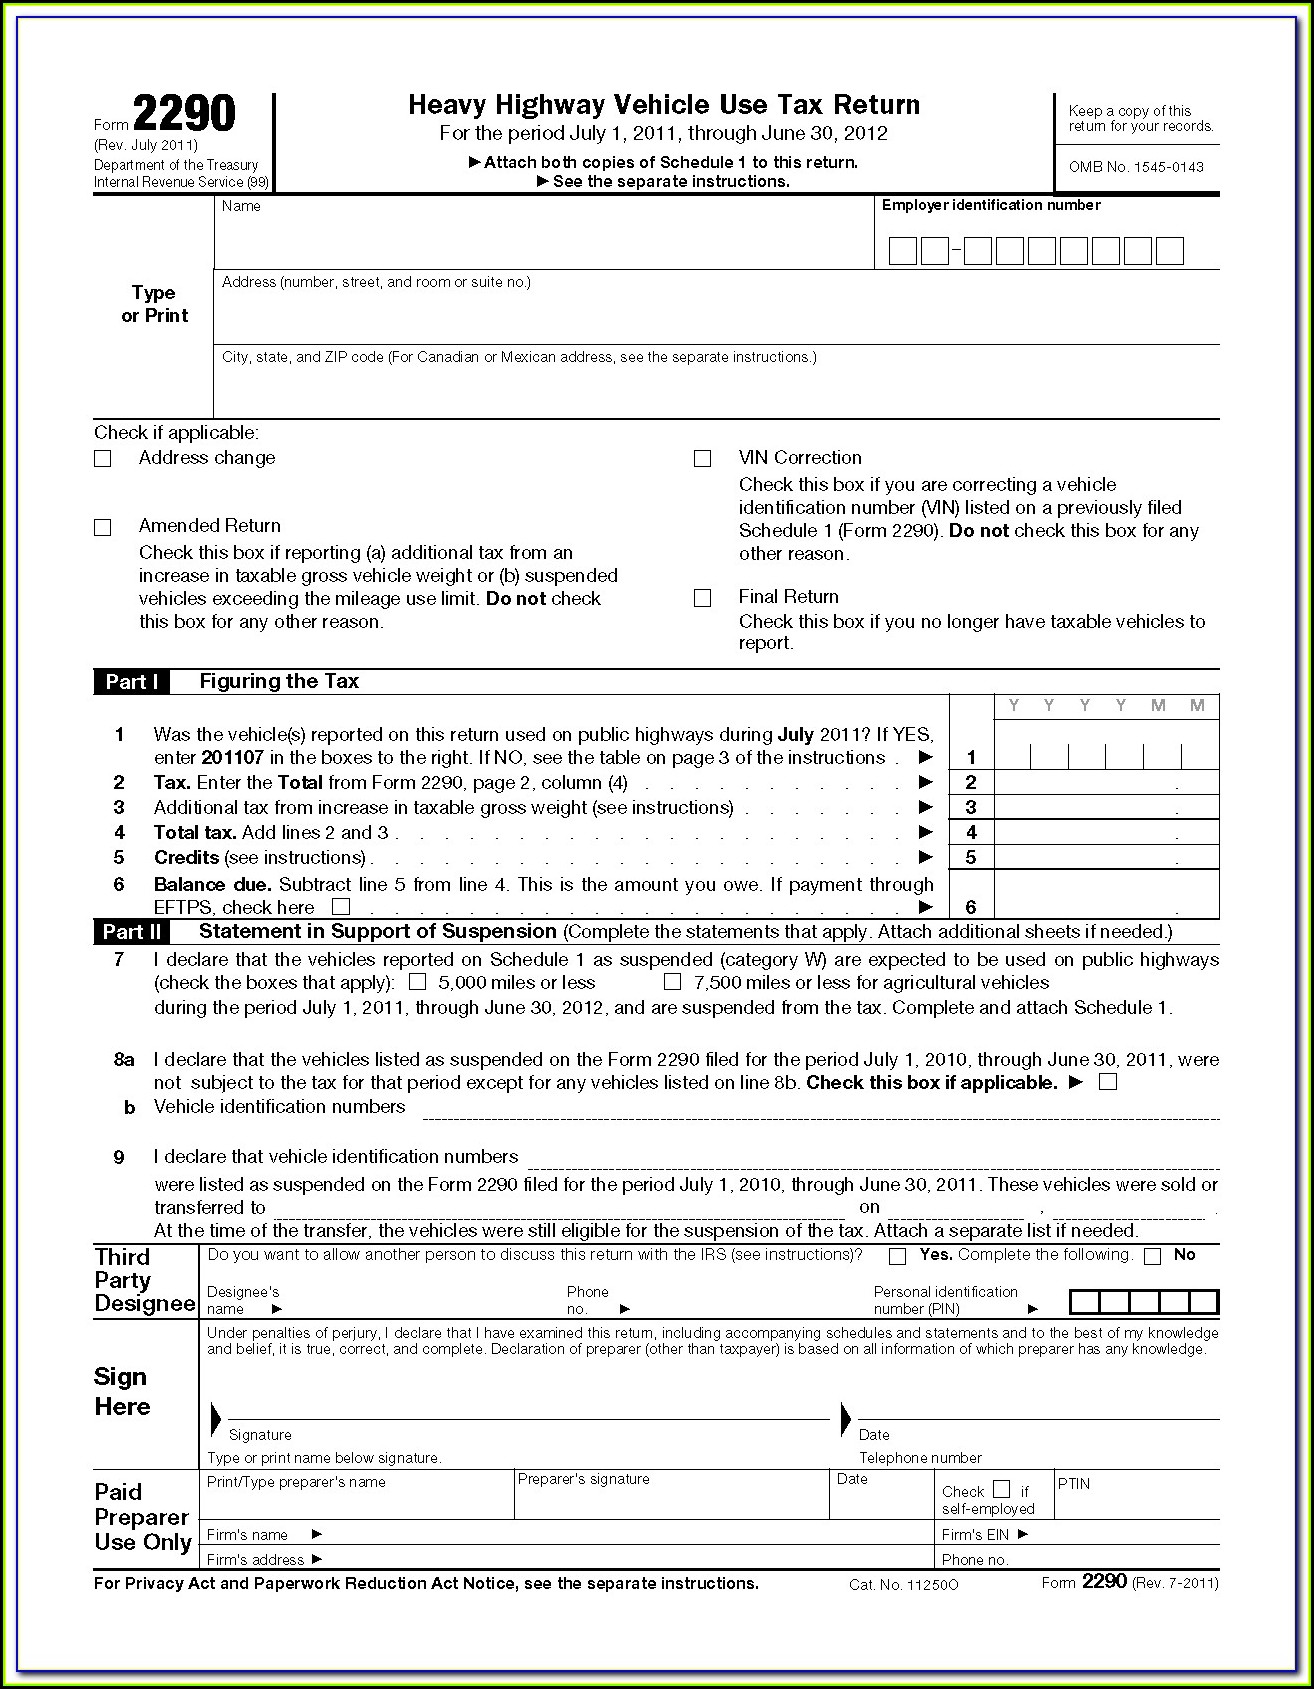 Heavy Highway Use Tax Form 2290 Instructions